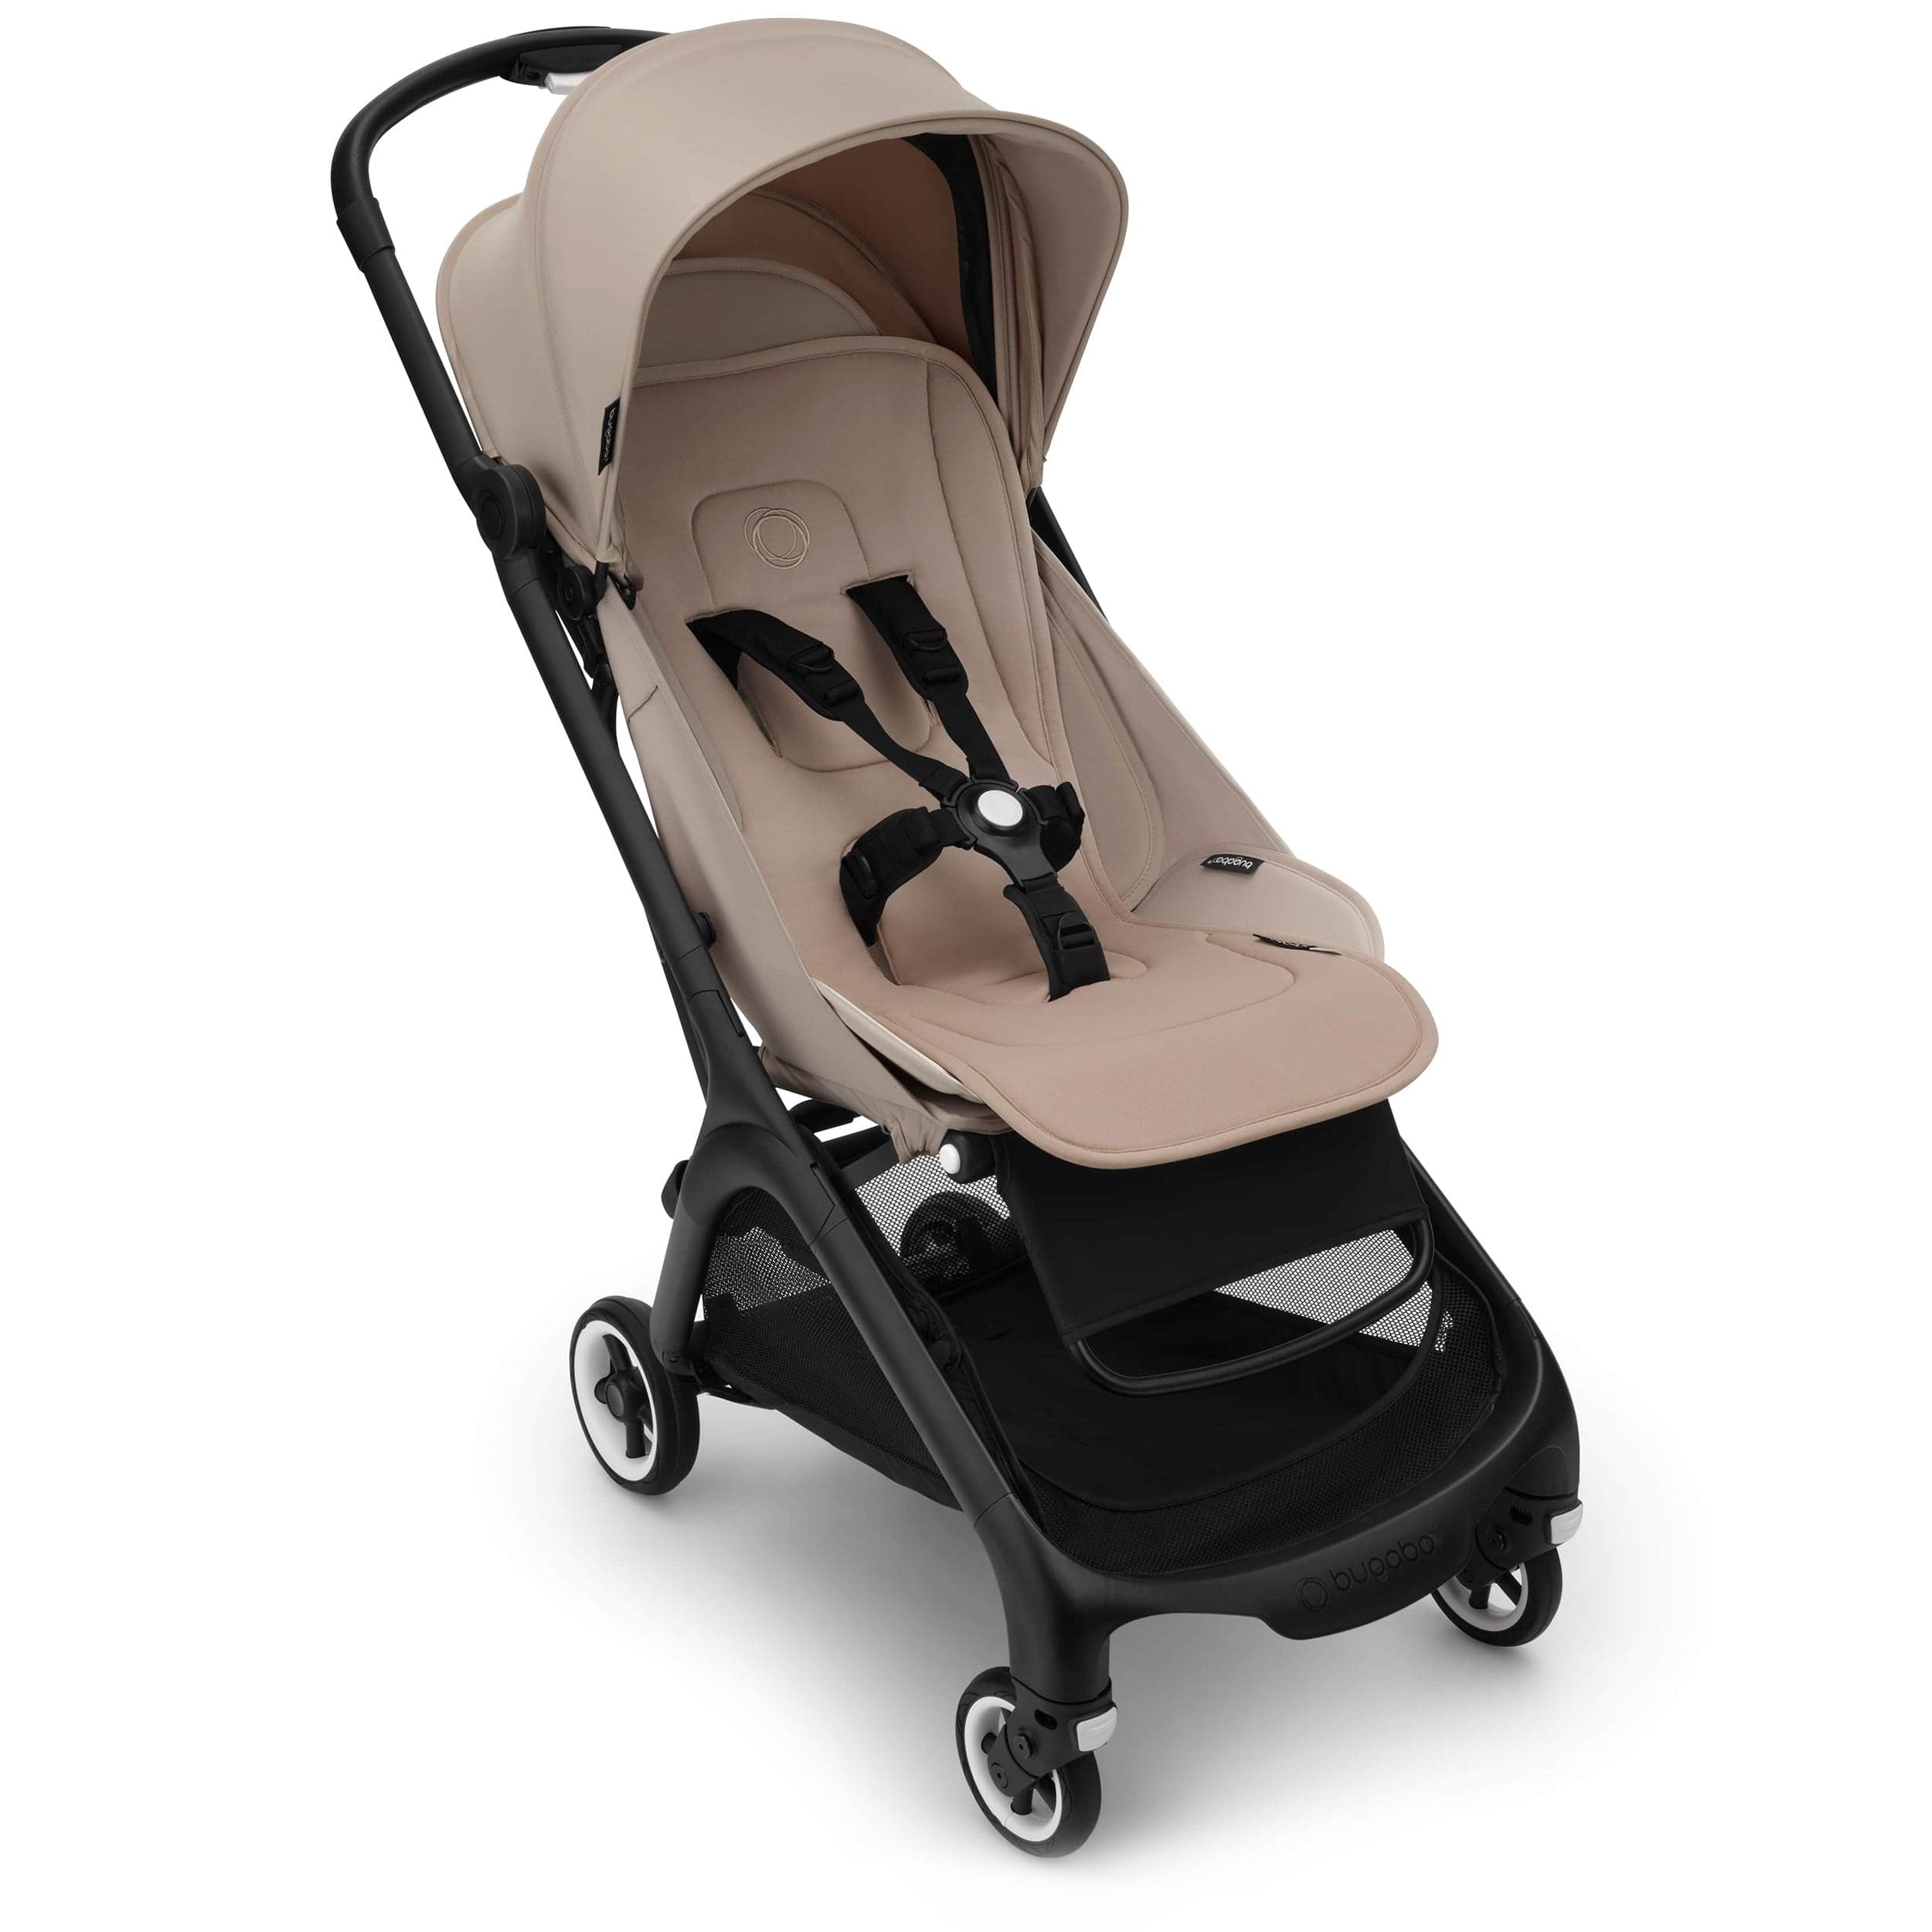 Bugaboo Butterfly in Desert Taupe Pushchairs & Buggies 100025031 8717447505648